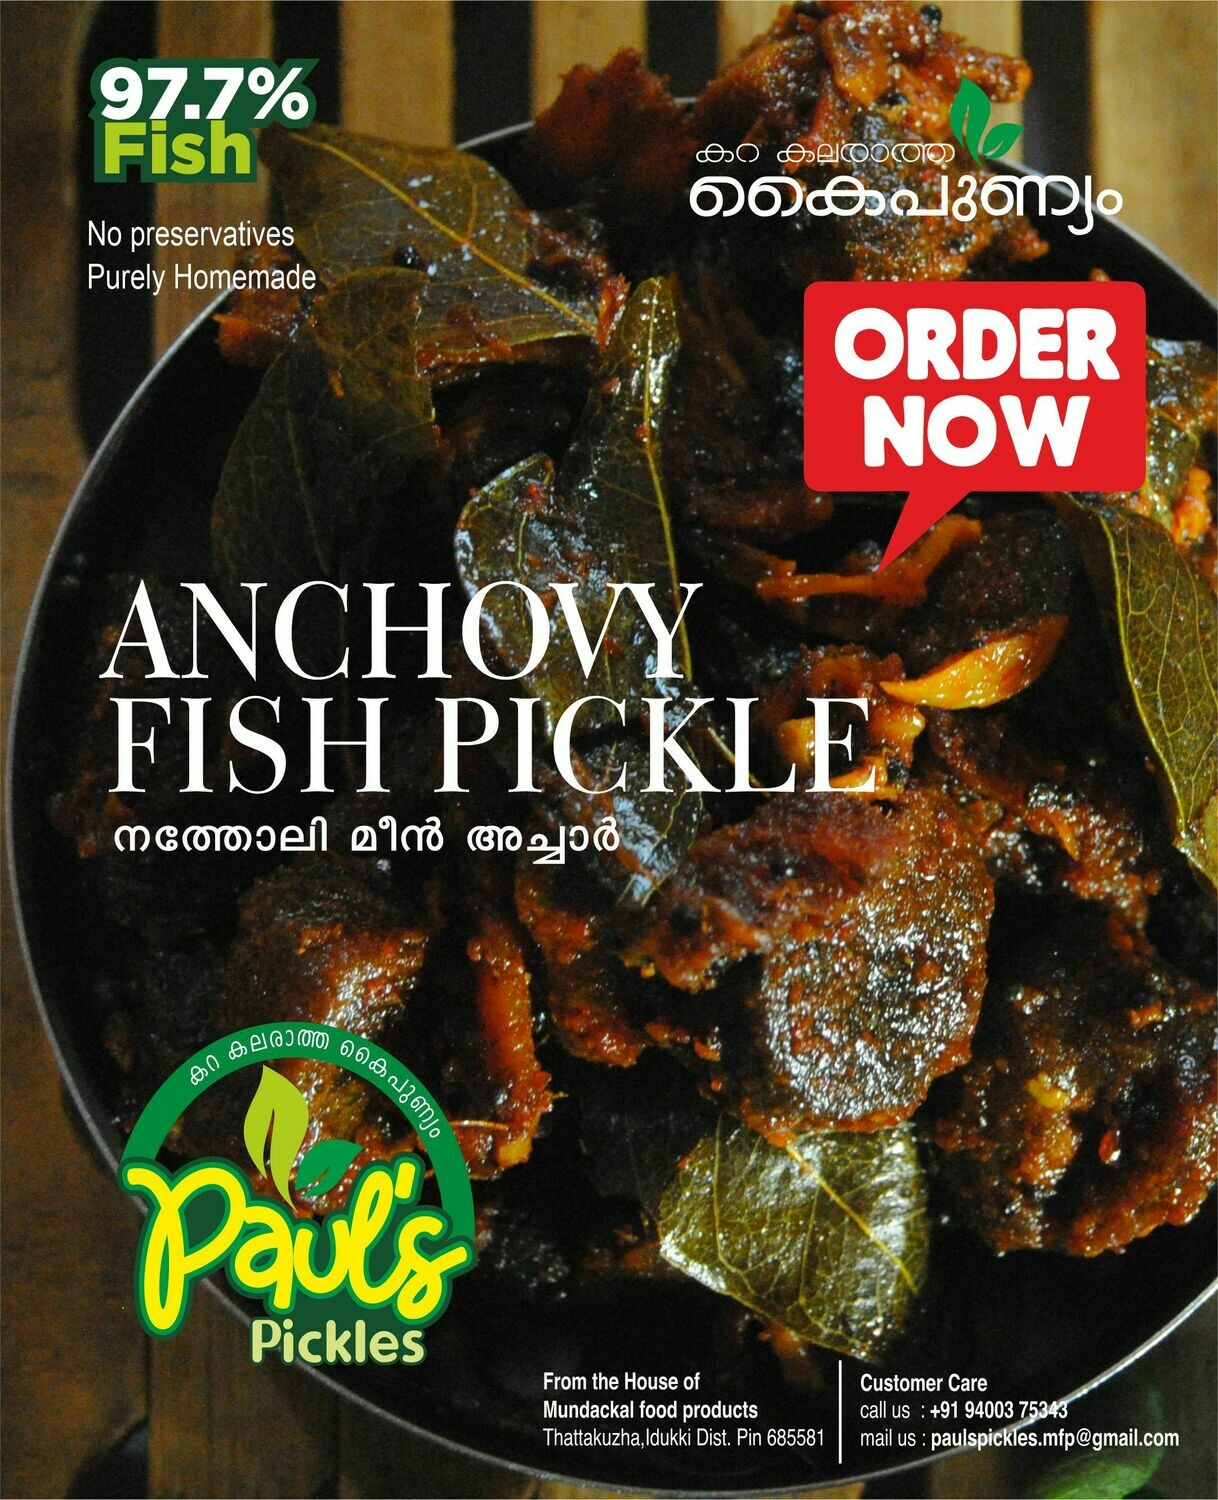 Anchovy Fish Pickles 97.7% fish 200g MRP ₹185 (₹35 off) --
-purely homemade
-No added colour
-Buy any two items or more to get a Free Delivery